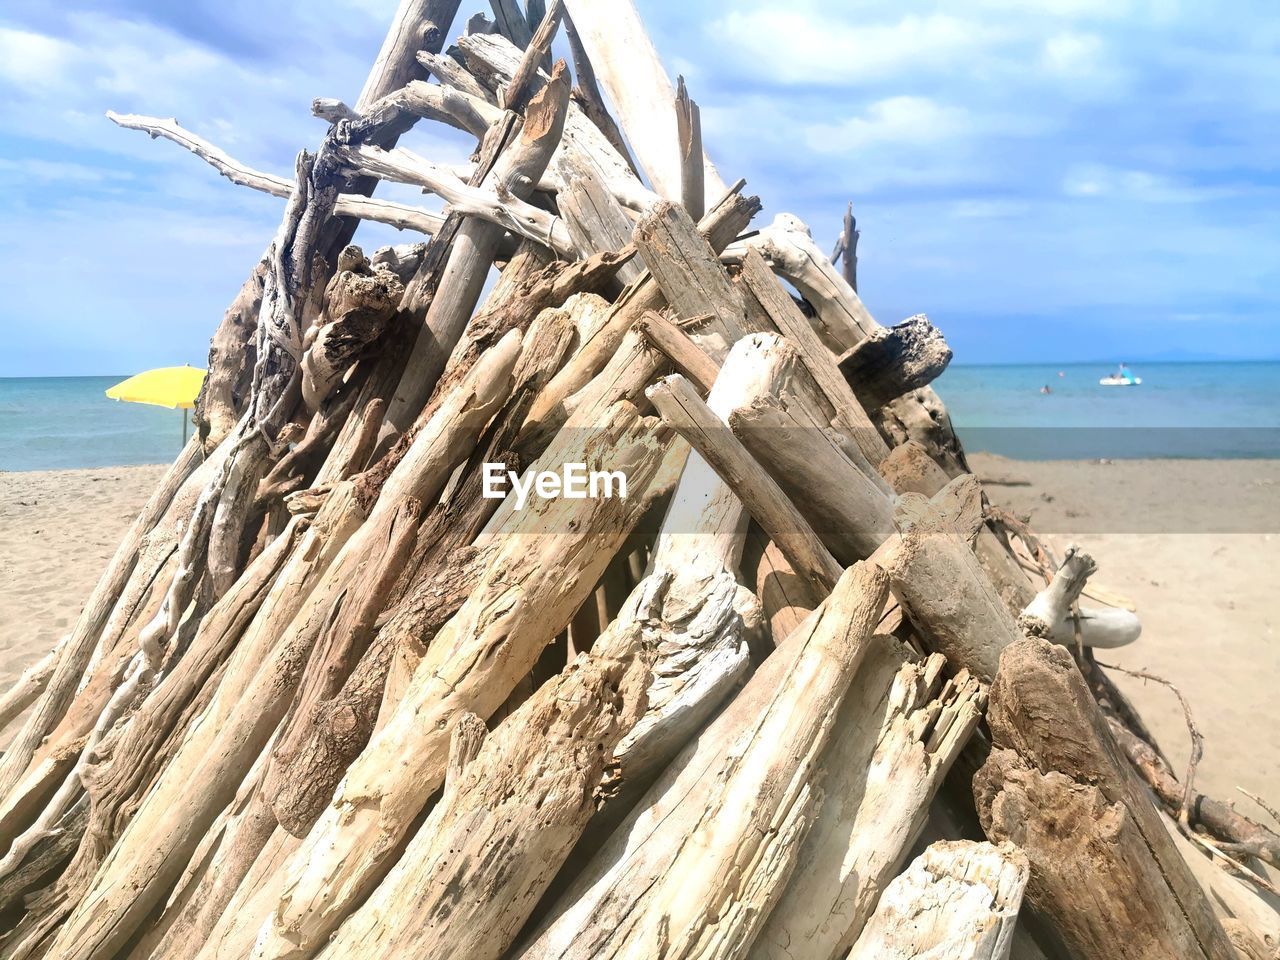 VIEW OF DRIFTWOOD ON BEACH